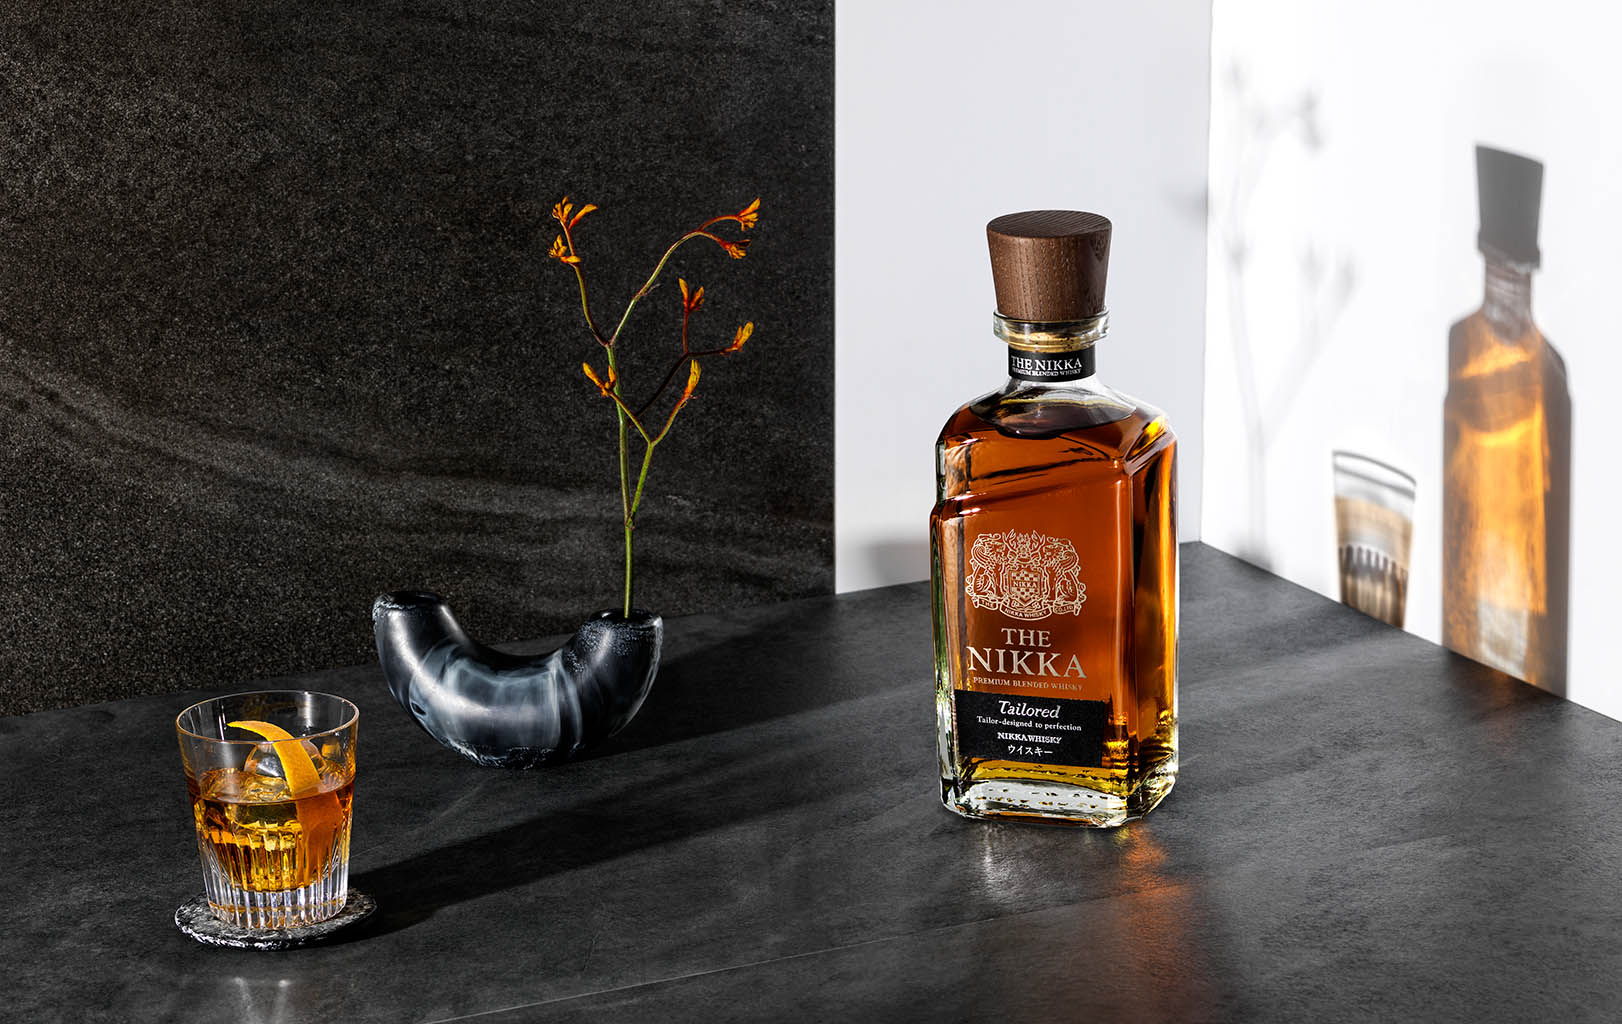 Drinks Photography of Nikka Whisky by Packshot Factory